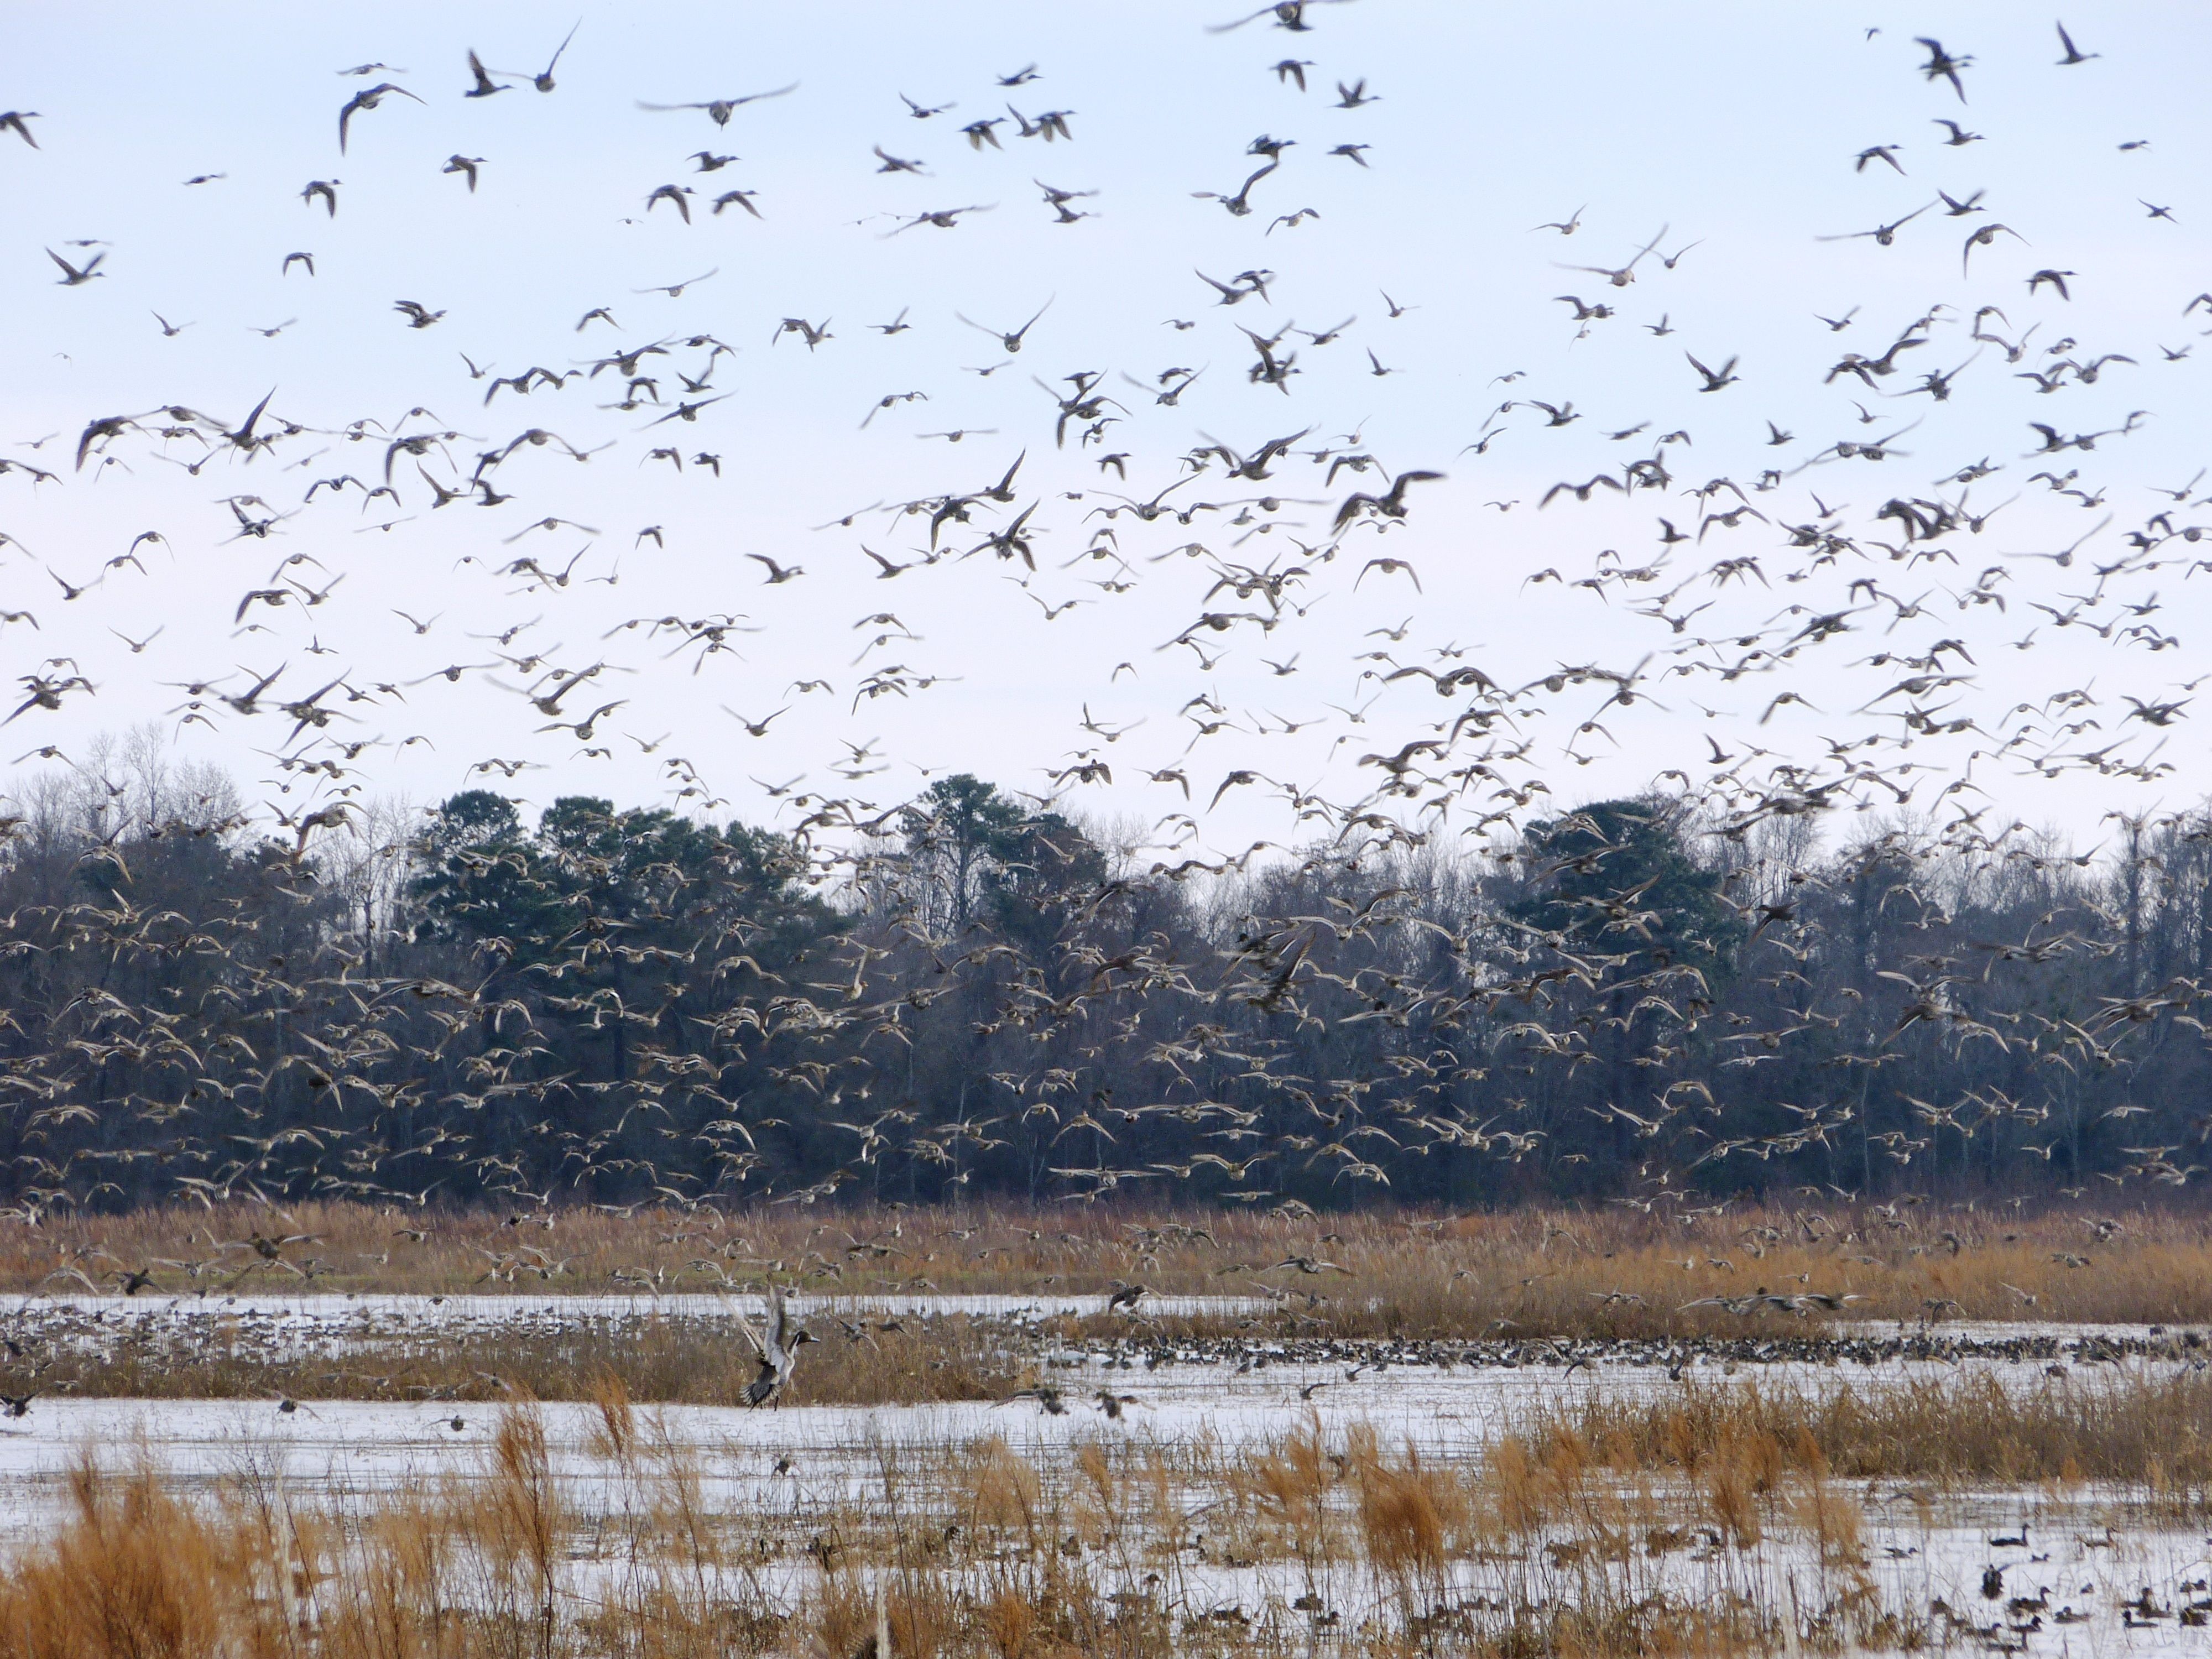 Pintail ducks and other birds fly over Mattamuskeet National Wildlife Refuge in North Carolina, located along the Atlantic Flyway.